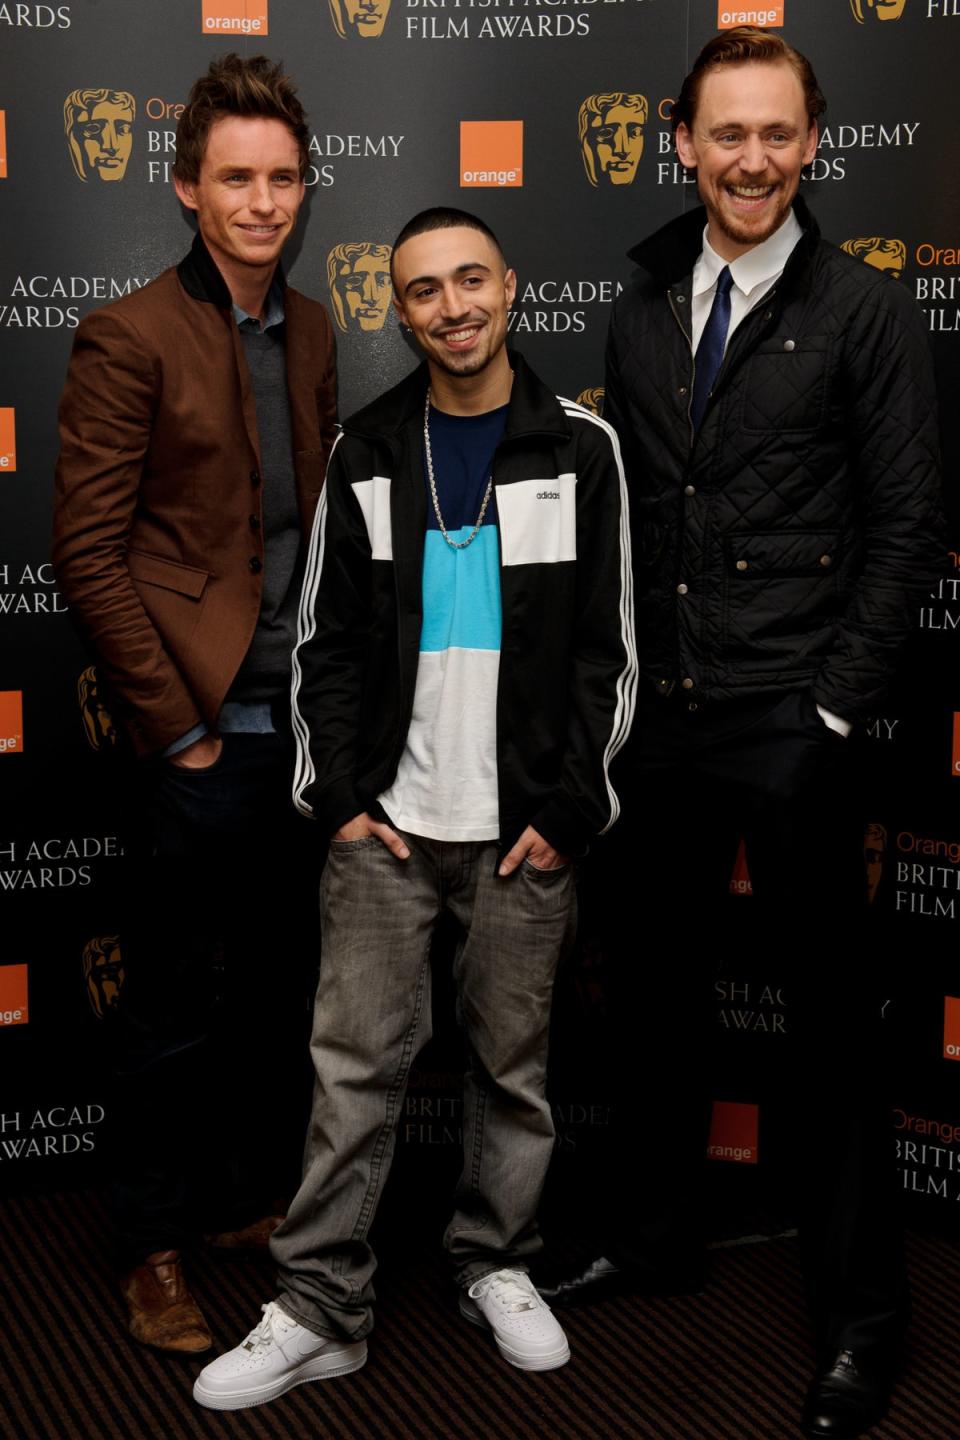 Rising star: Deacon with Eddie Redmayne and Tom Hiddleston at a Bafta event in 2012 (Getty)